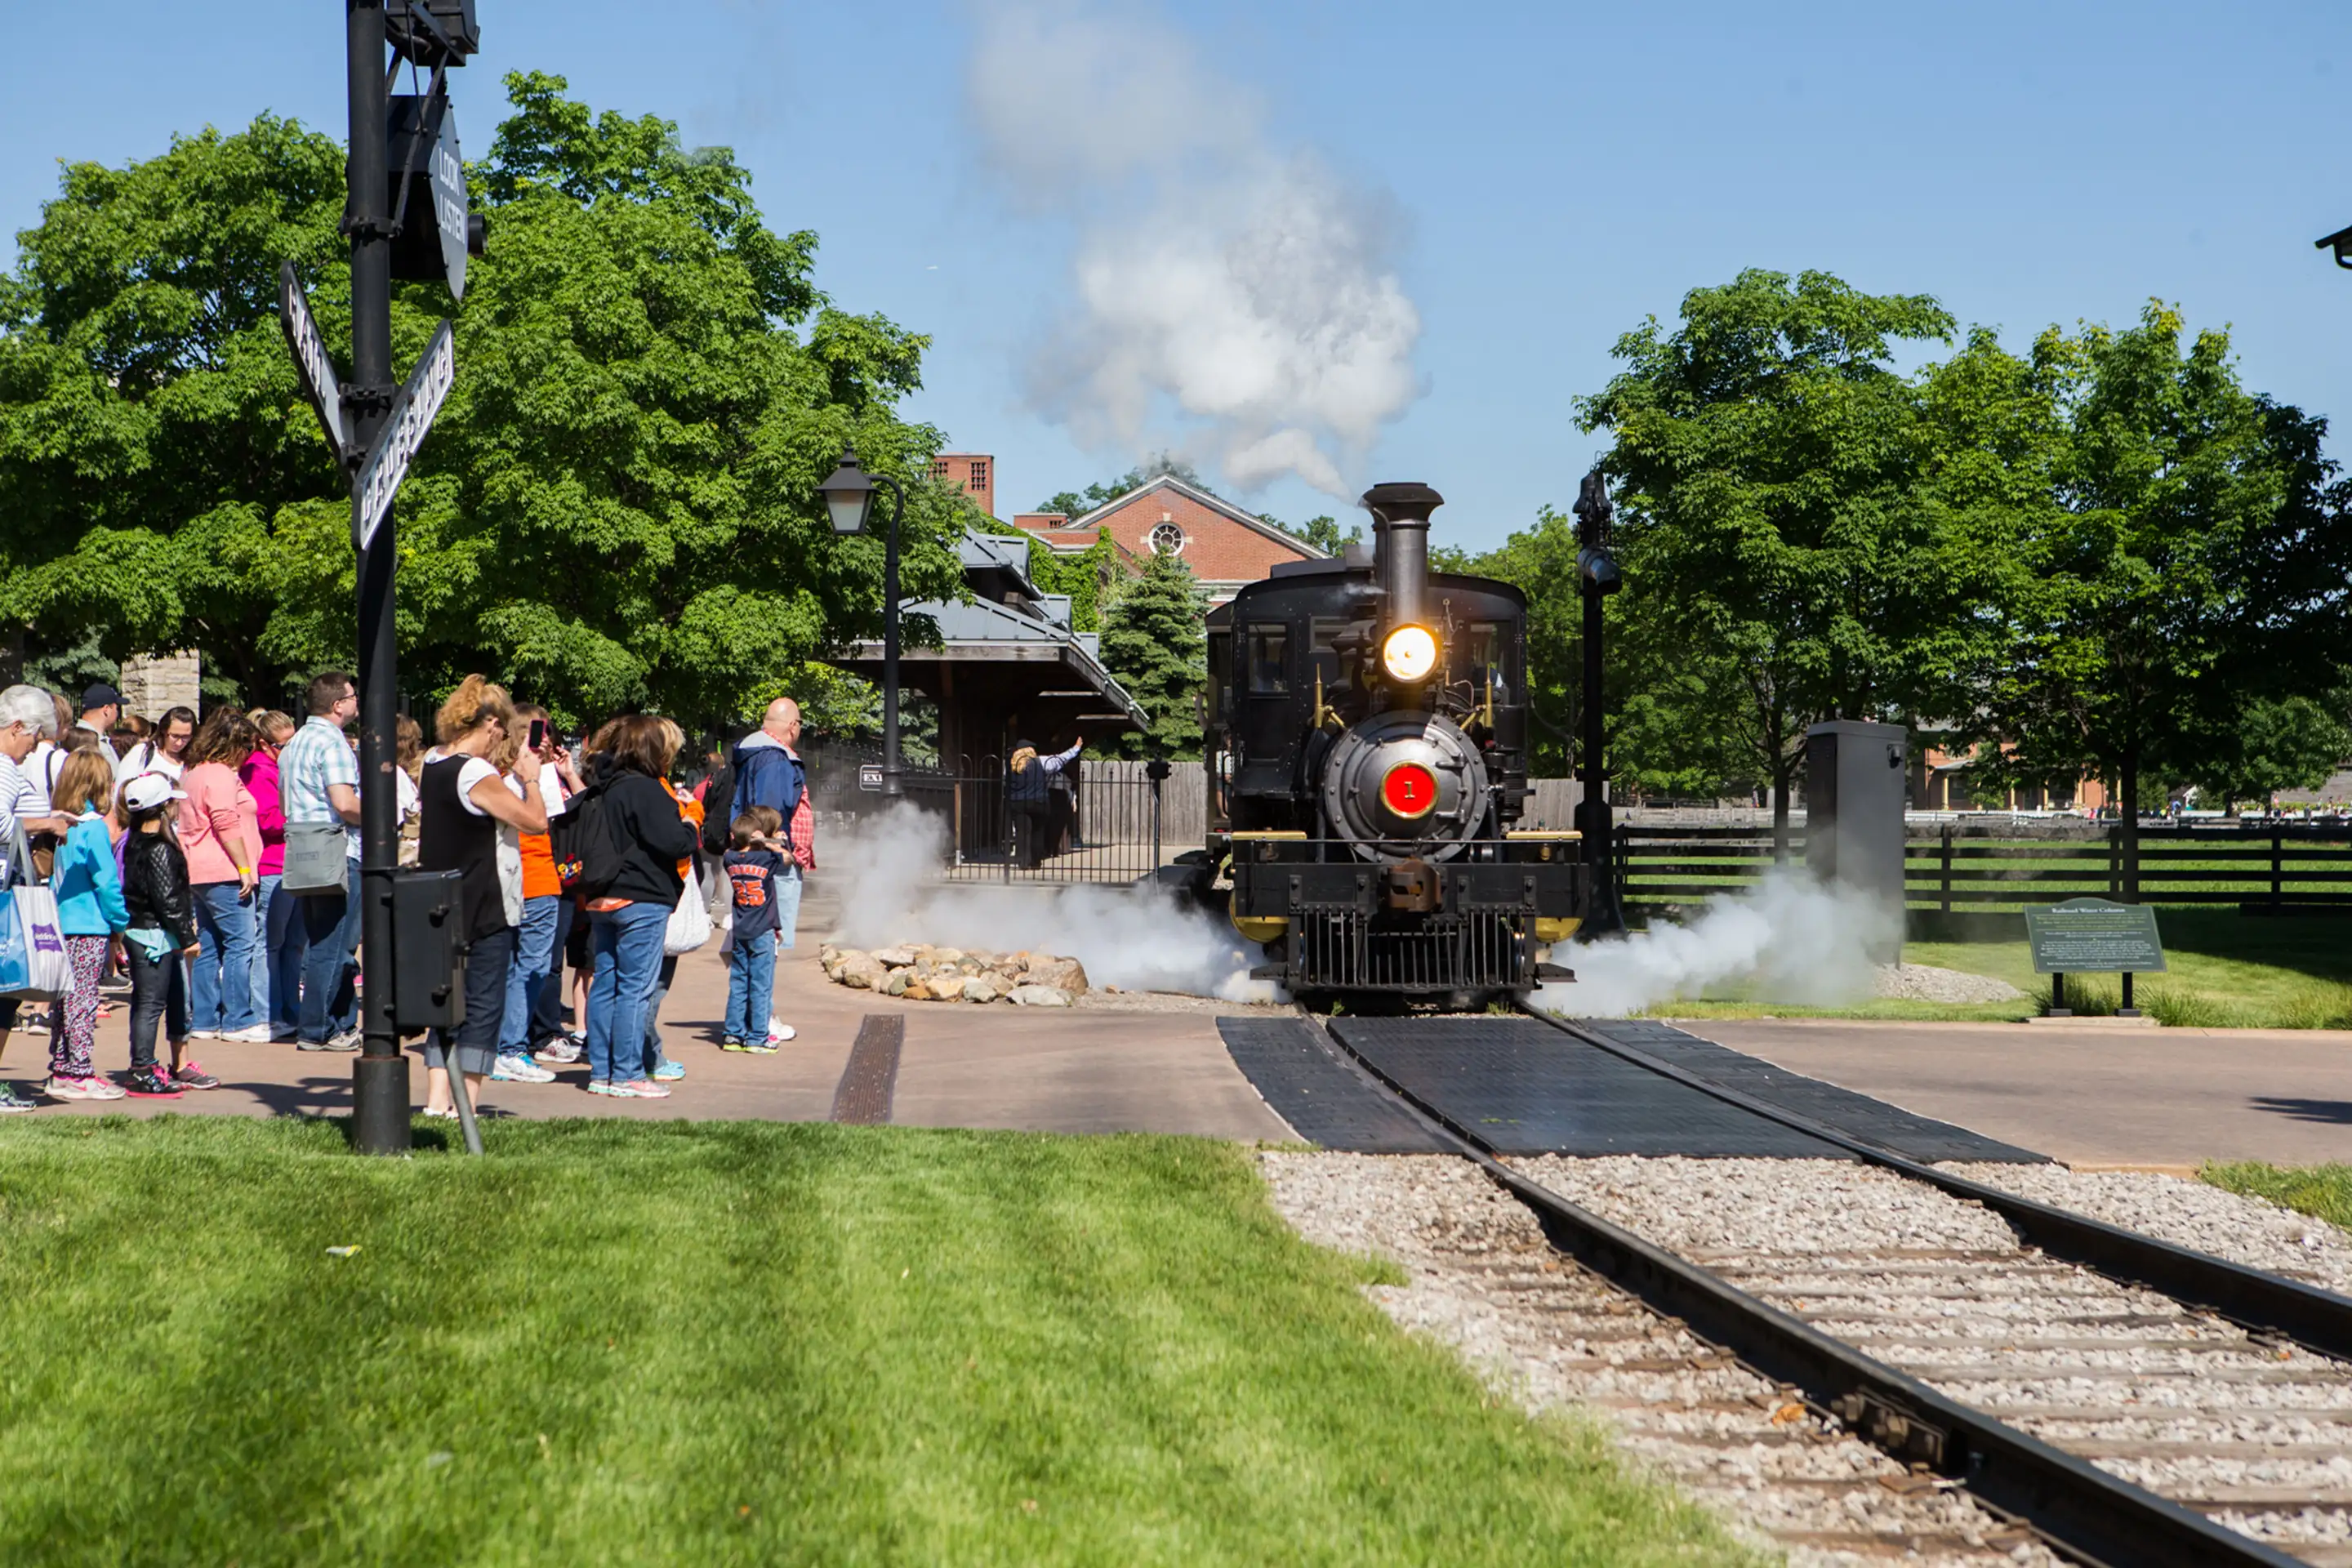 Residents of West Bloomfield are a short 35 minute drive from Greenfield Village and The Henry Ford Museum, an 80 acre indoor and outdoor history museum complex.